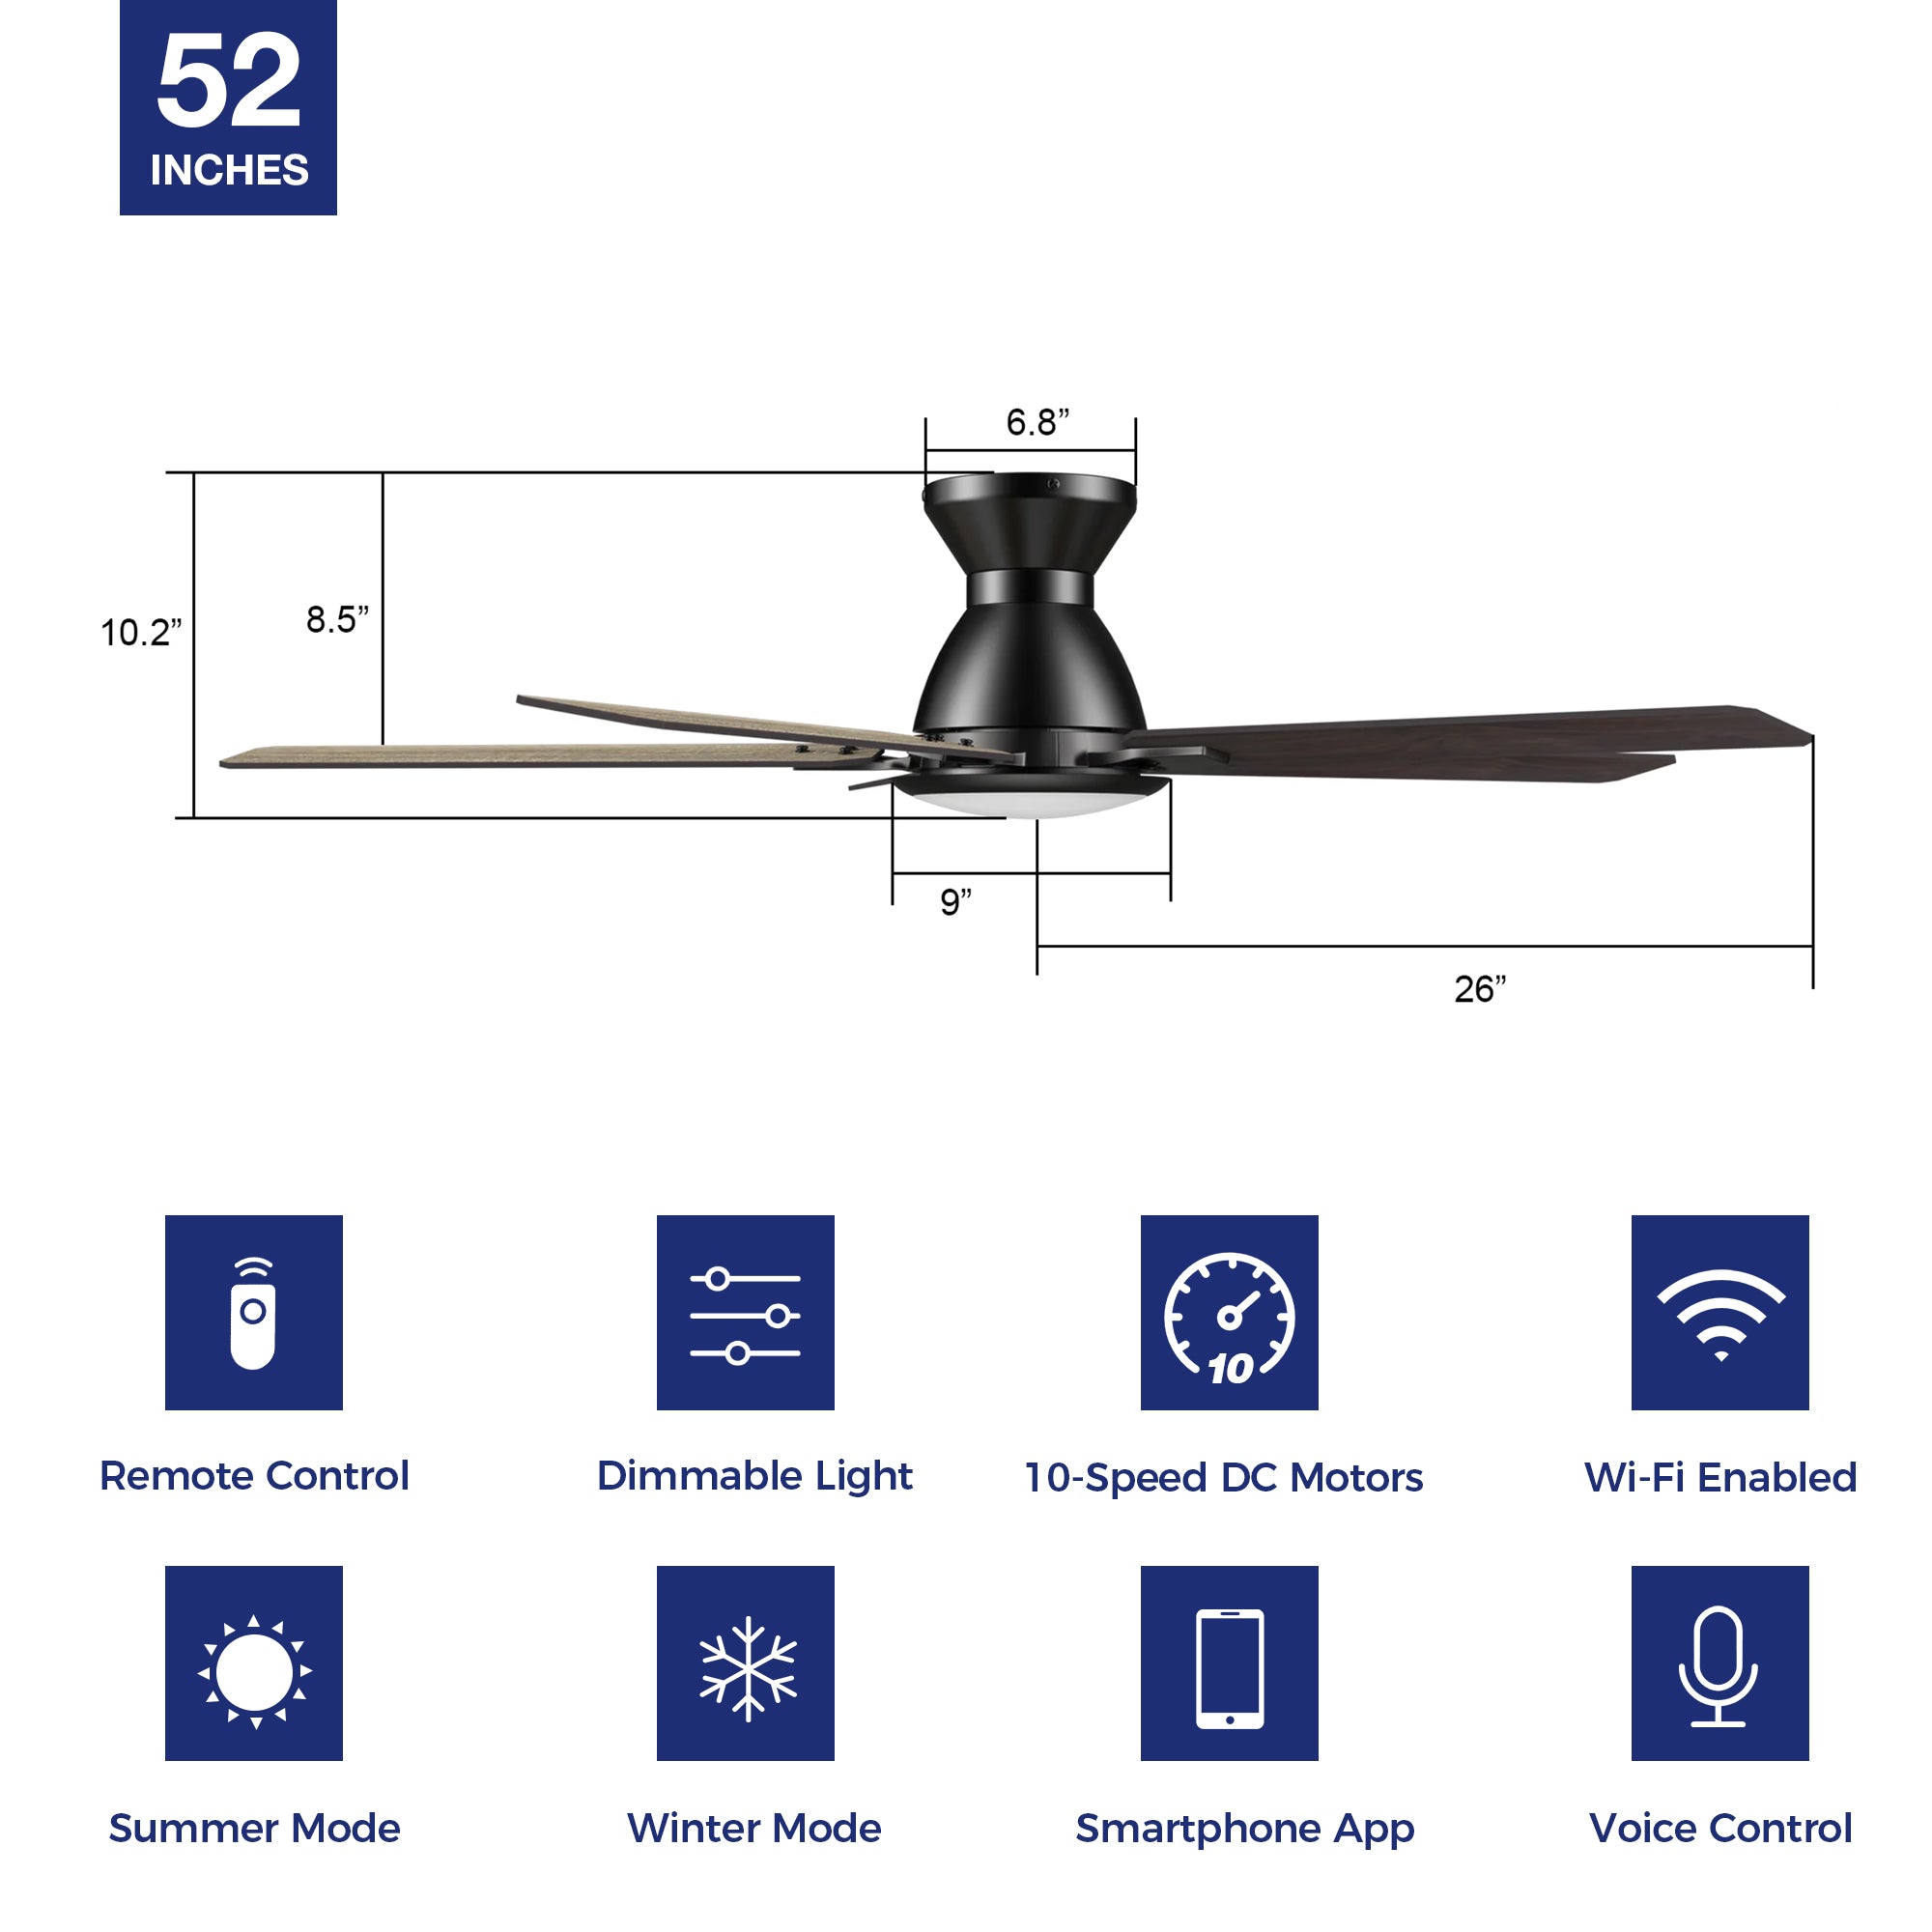 This Essex 52&#39;&#39; smart ceiling fan keeps your space cool, bright, and stylish. It is a soft modern masterpiece perfect for your large indoor living spaces. This Wi-Fi smart ceiling fan is a simplicity designing with Black finish, use elegant Plywood blades,Glass shade and has an integrated 4000K LED cool light. The fan features Remote control, Wi-Fi apps, Siri Shortcuts and Voice control technology (compatible with Amazon Alexa and Google Home Assistant ) to set fan preferences.